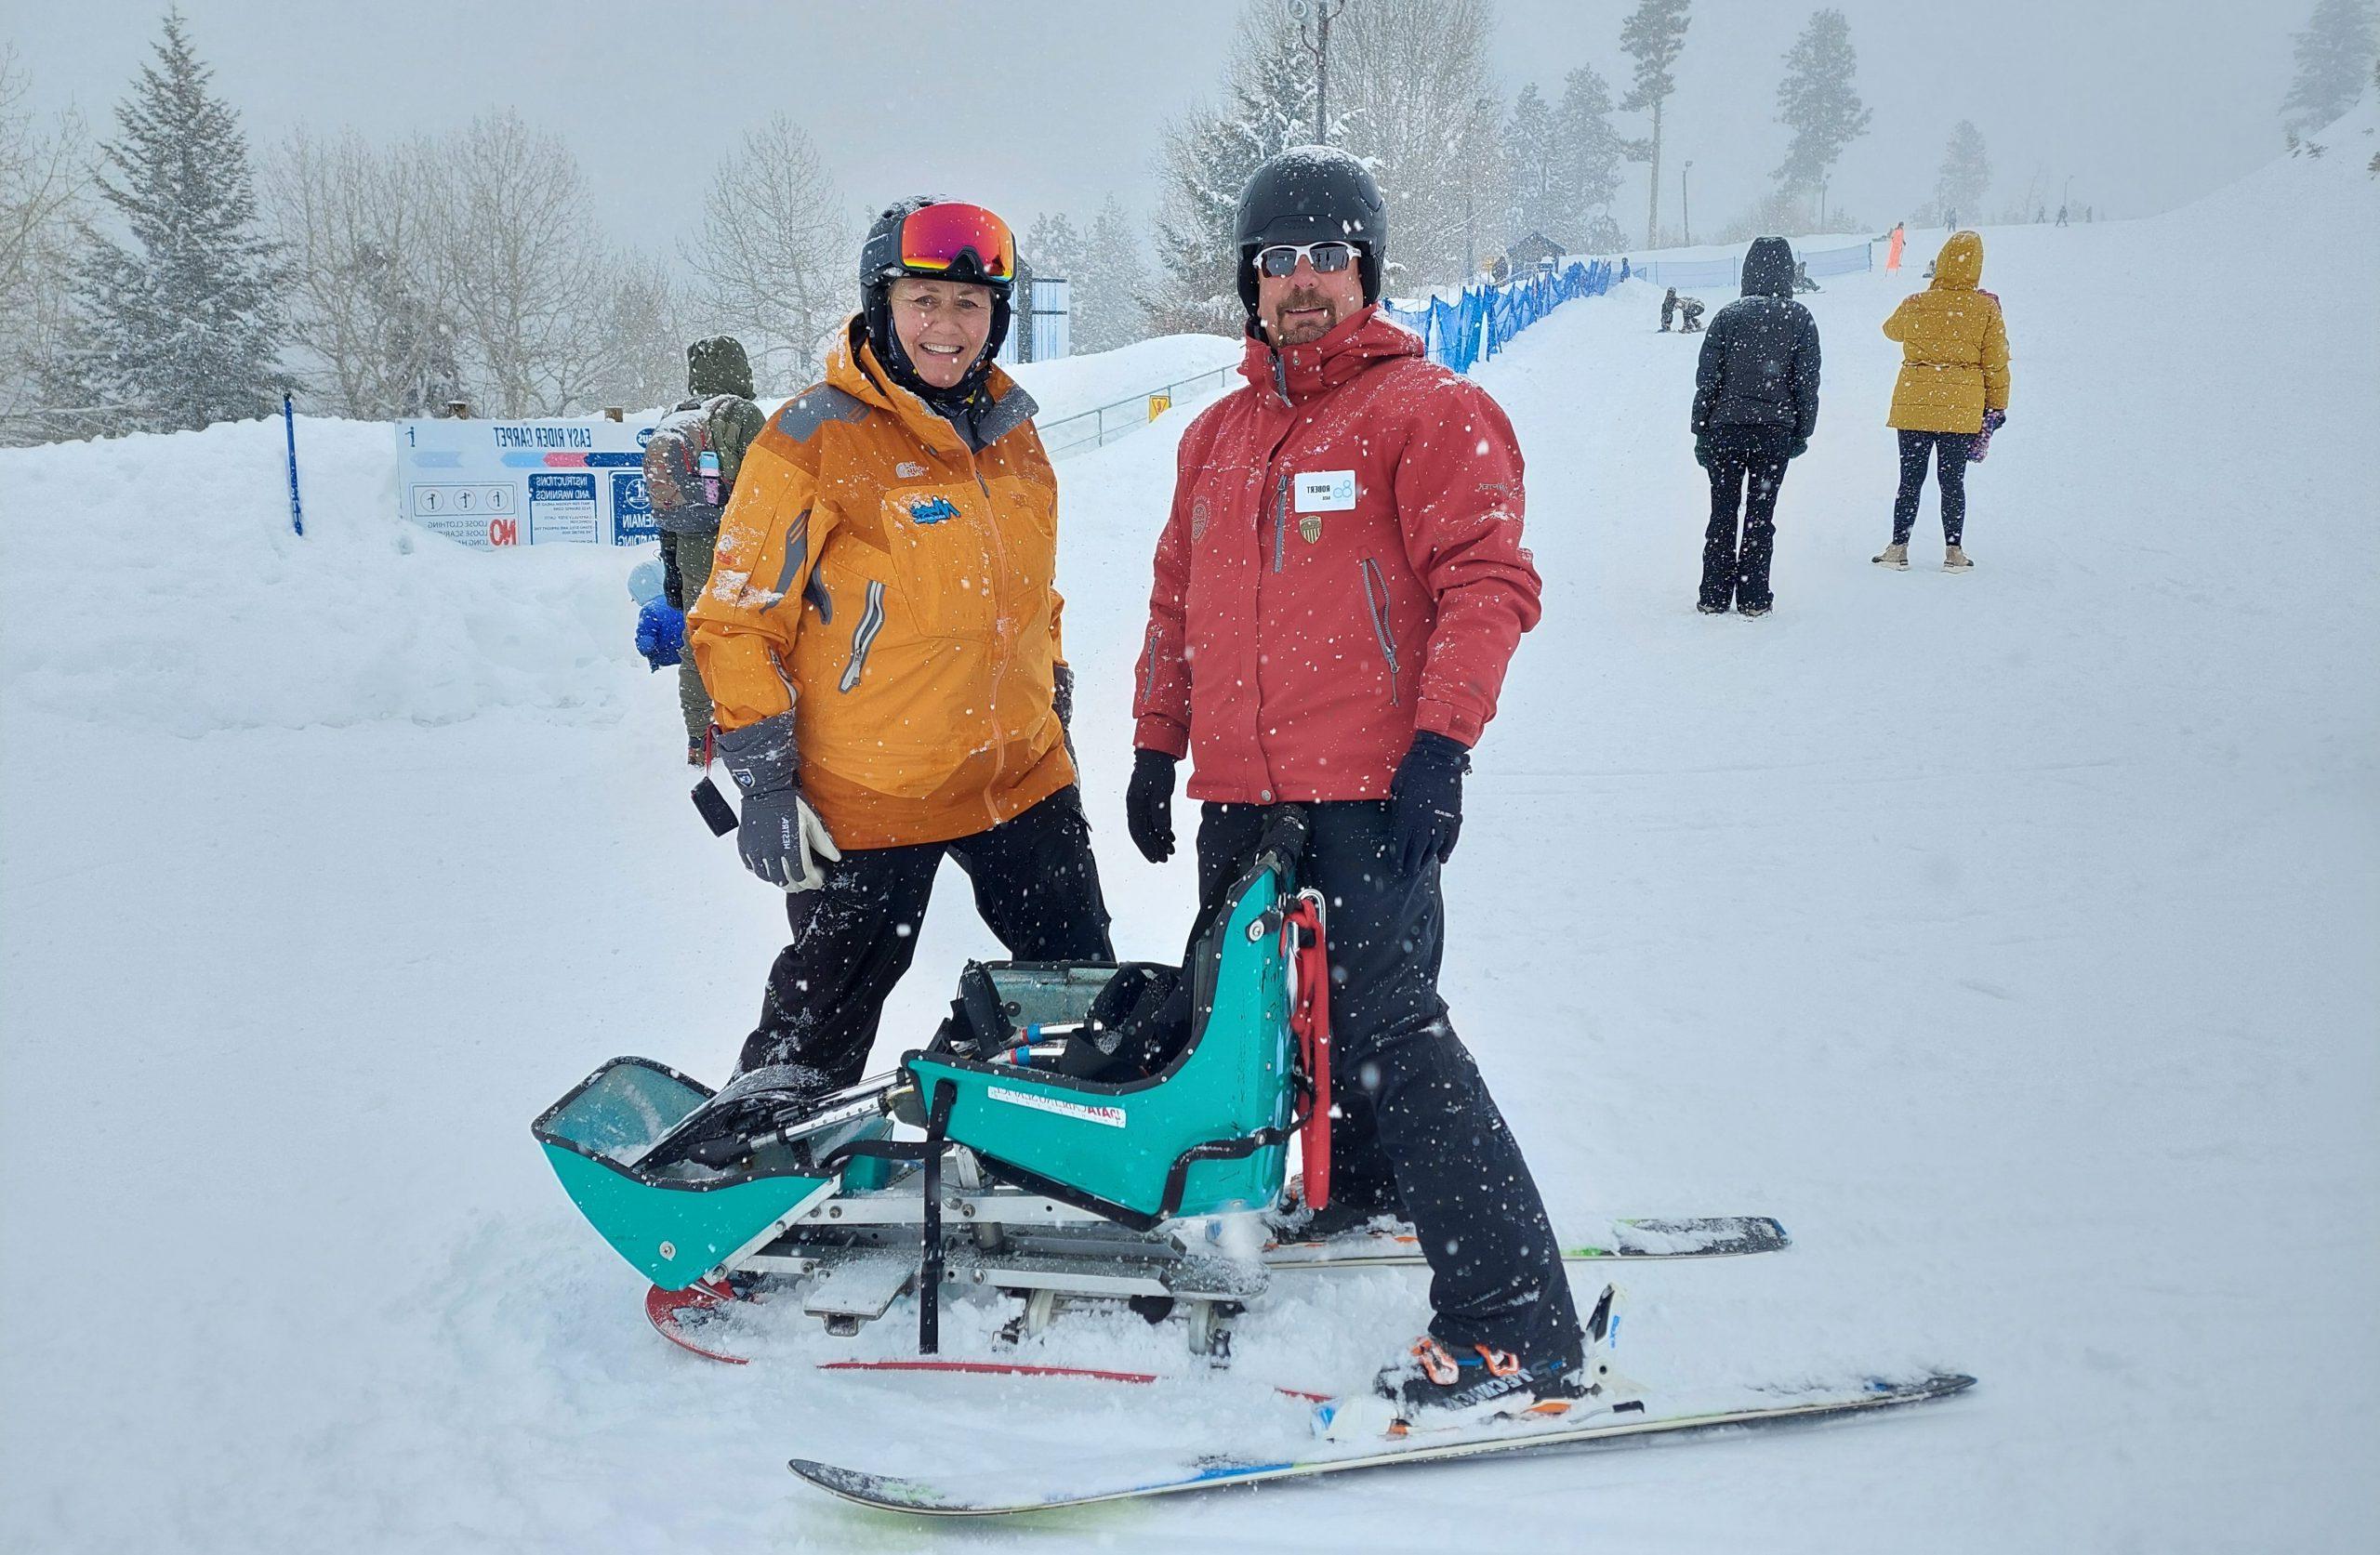 Employee Robert Walters and woman with an adaptive snow ski